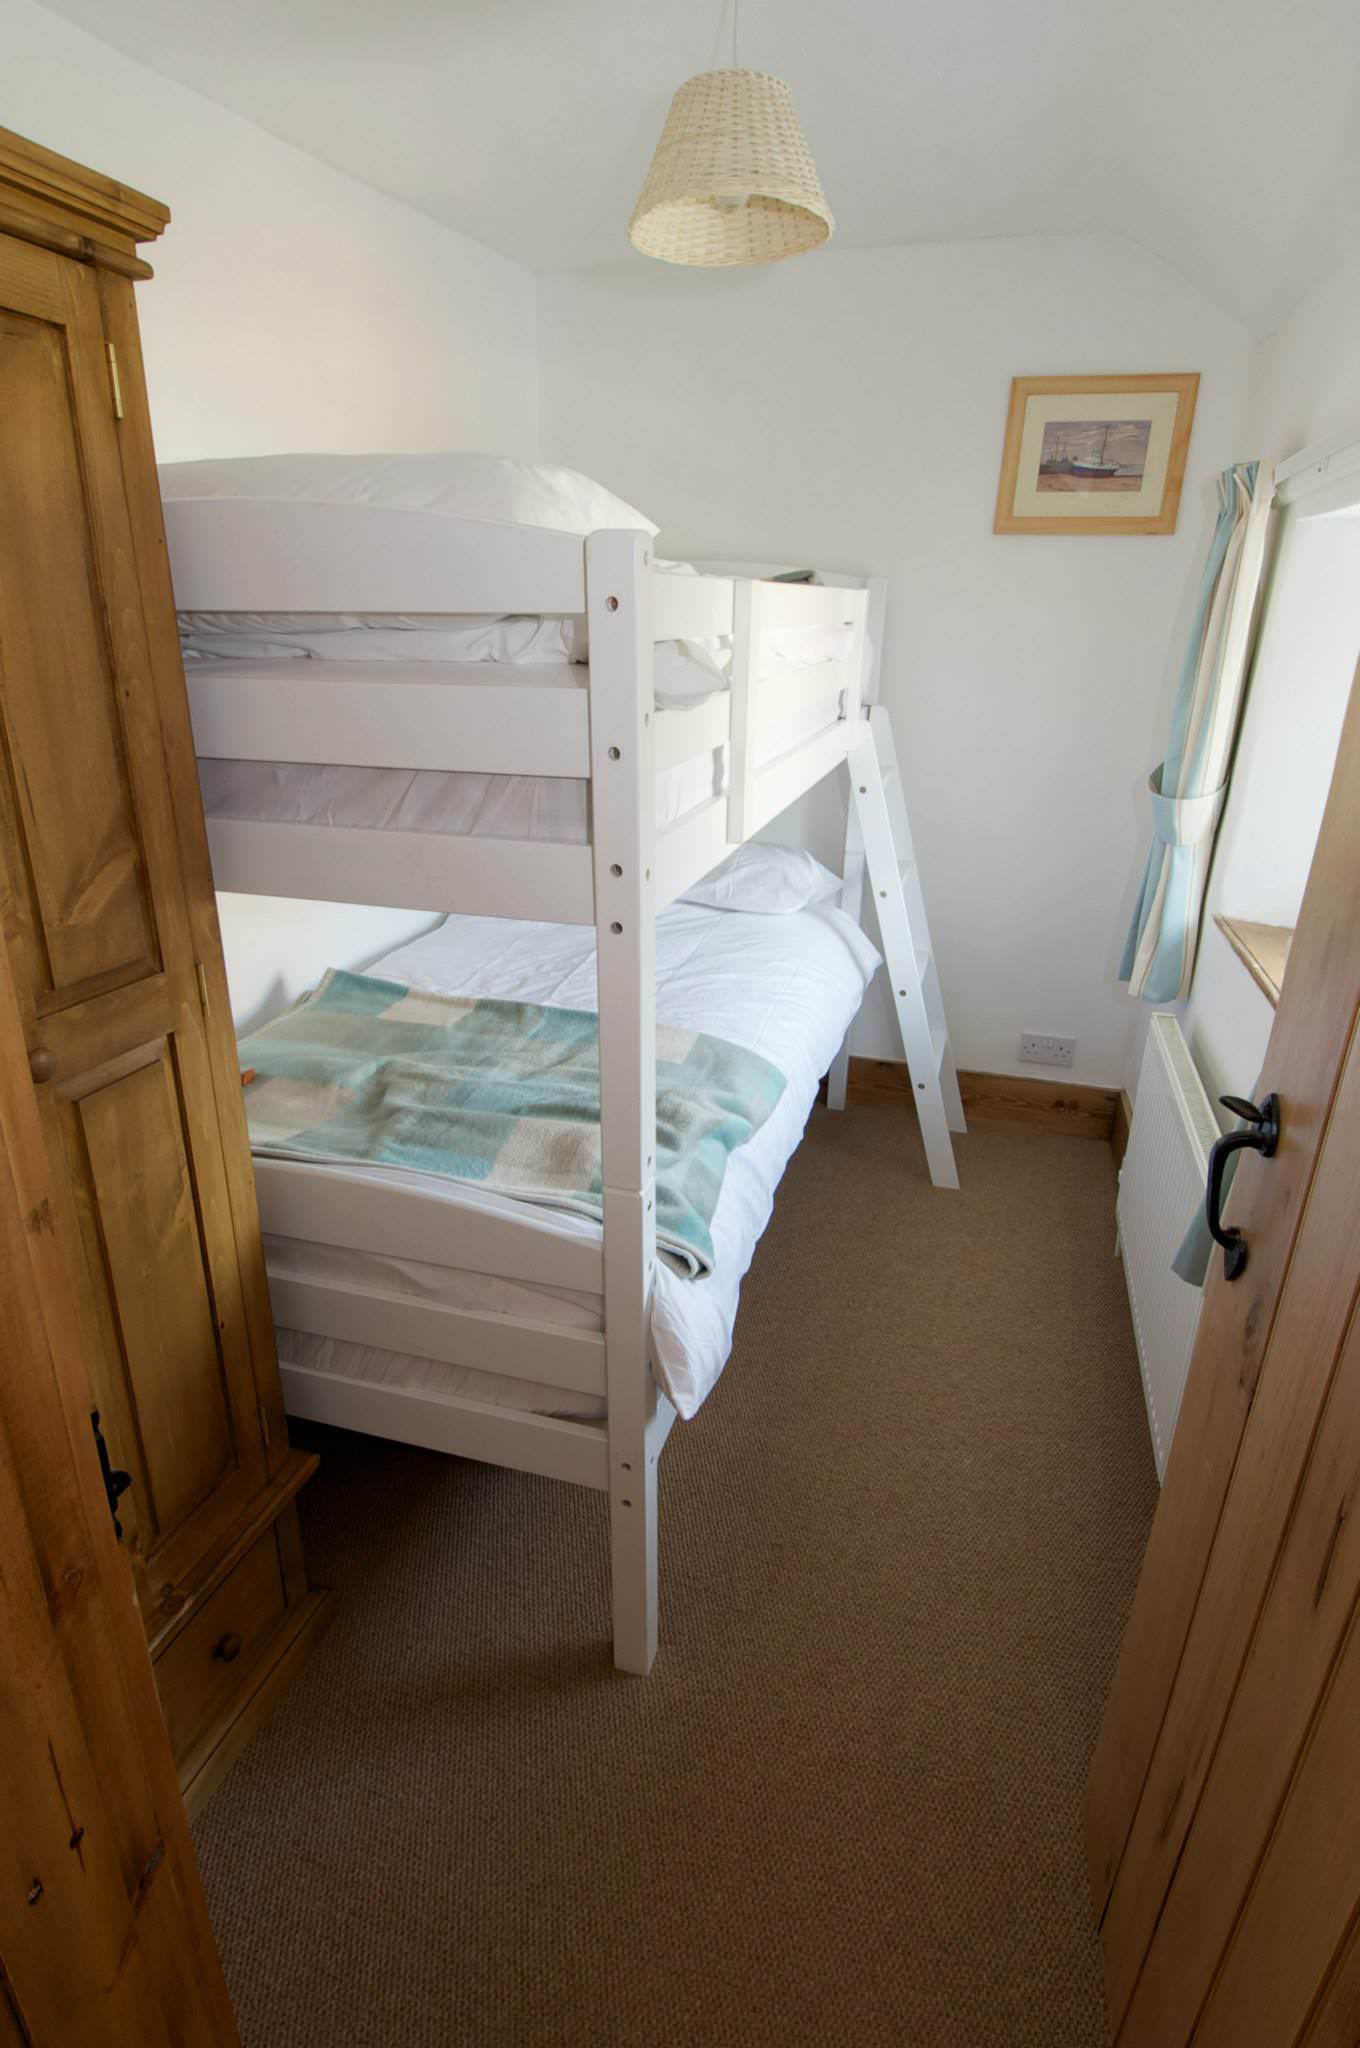 Photo of bunkbed room